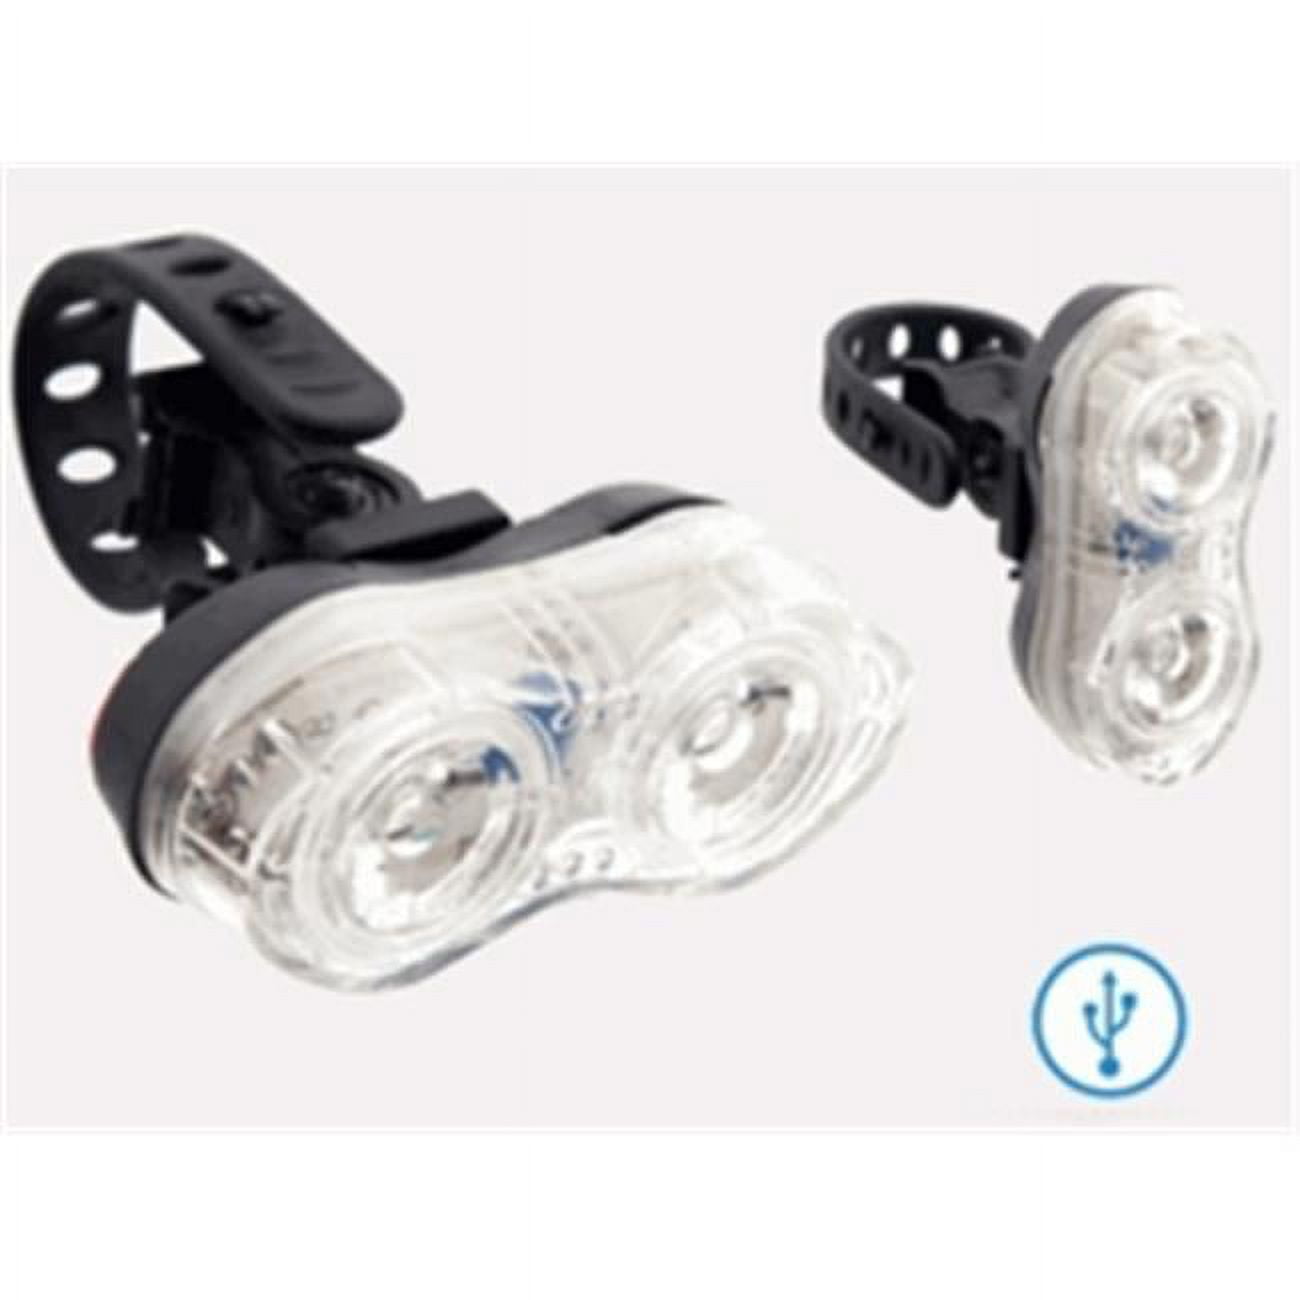 179w 2.5 W Led Head Light With Usb Recharge